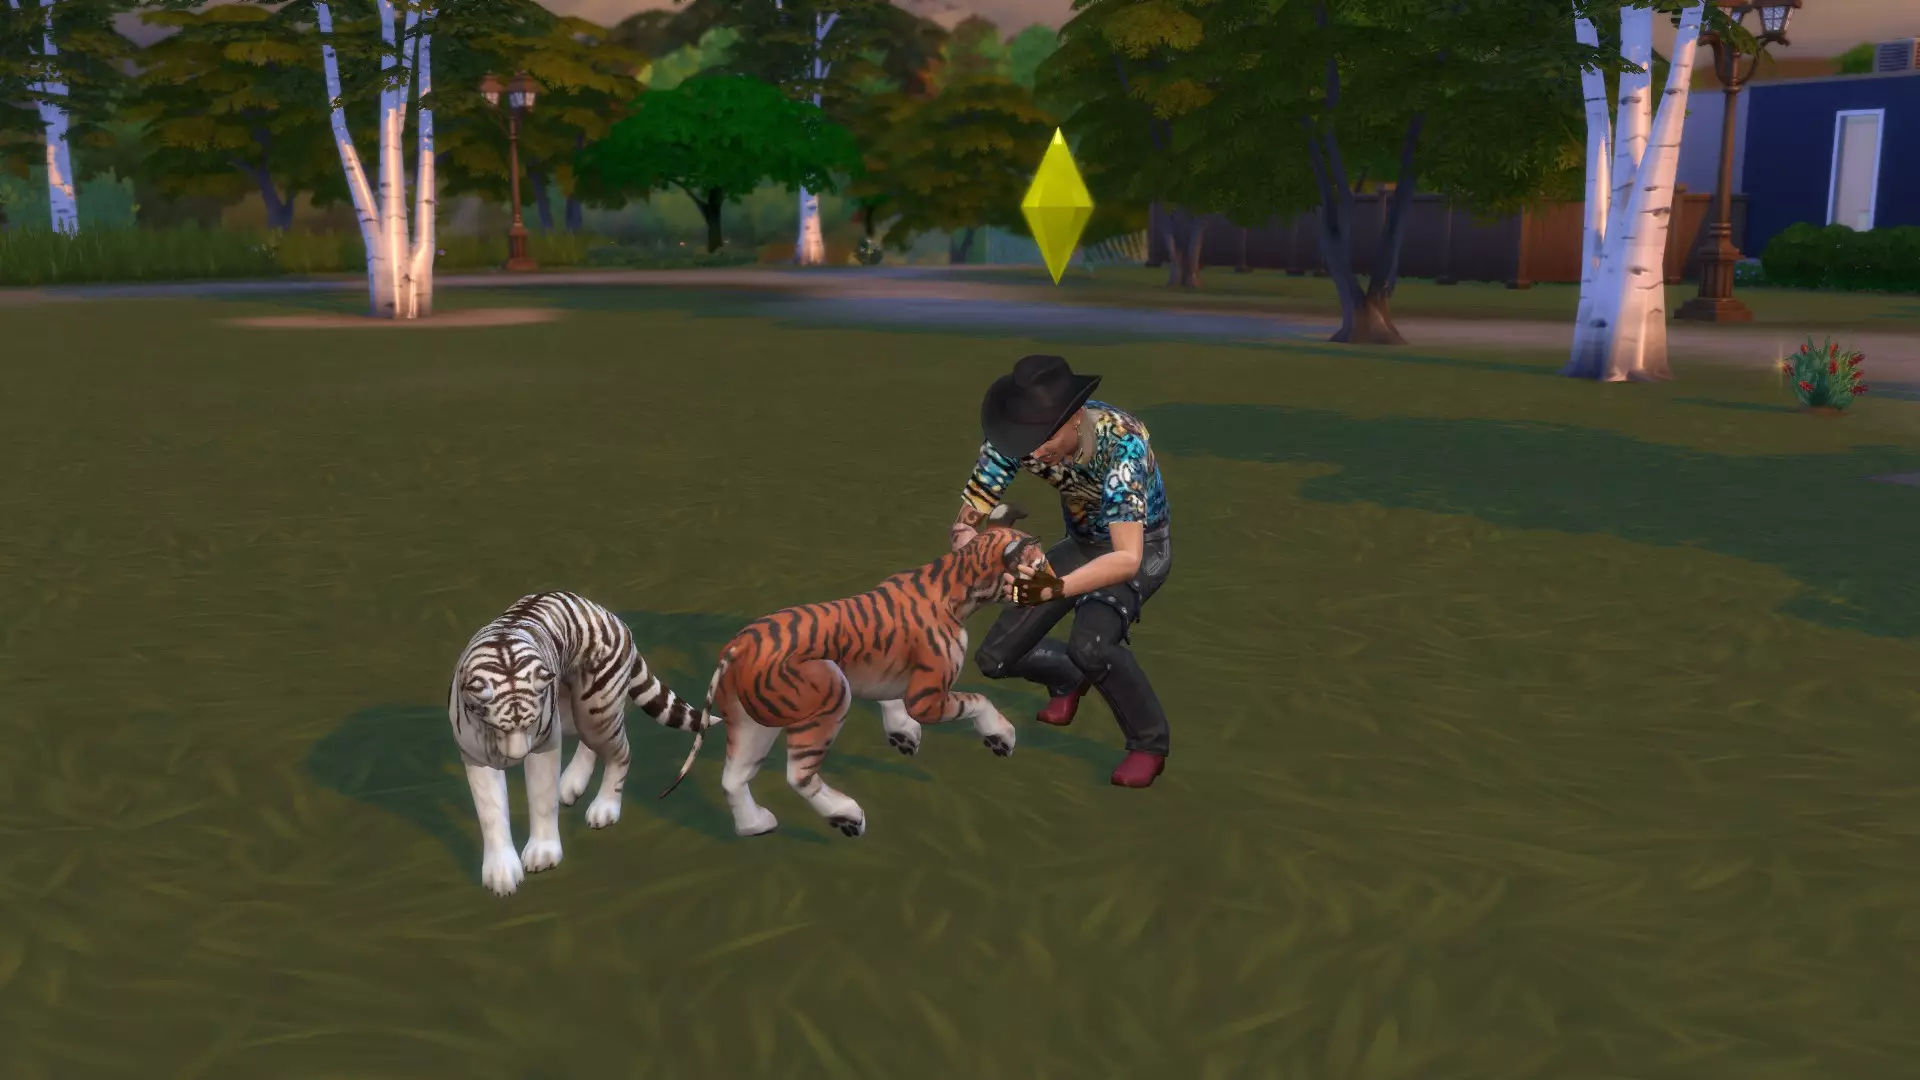 Kari even created 'tigers' for Joe, simply giving dogs tiger stripes (